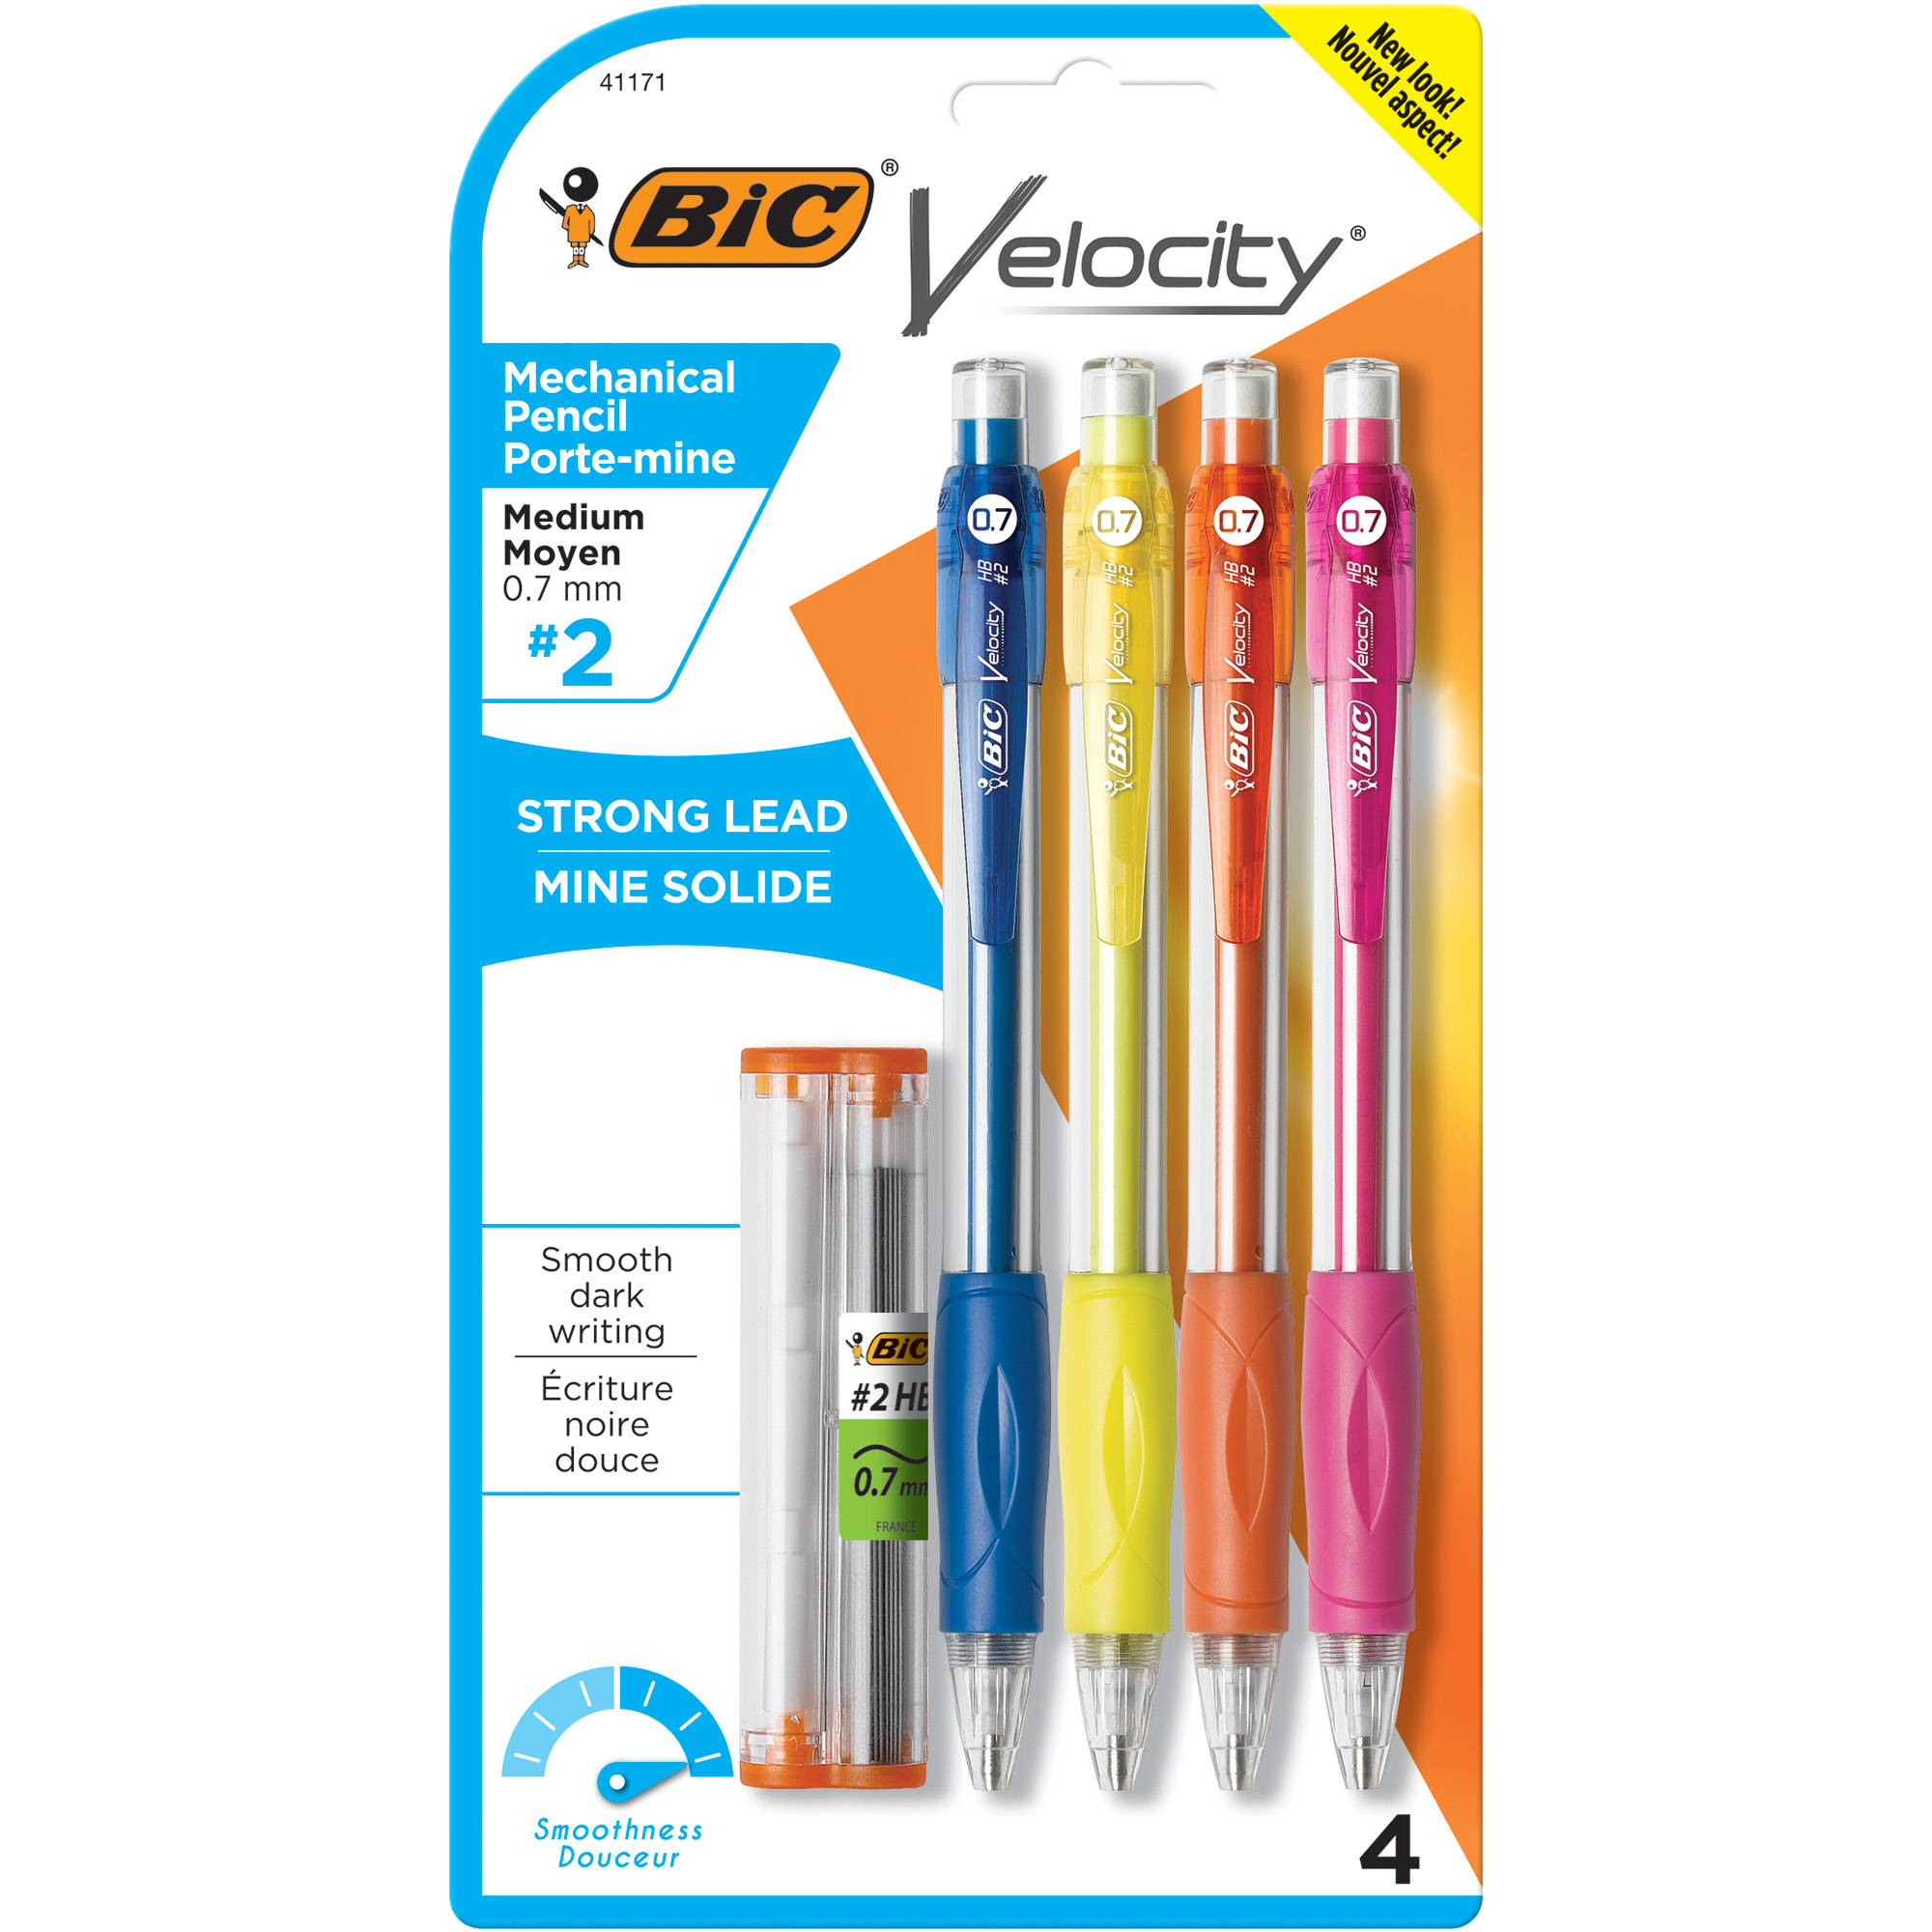 BIC Velocity Side Clic Mechanical Pencil 4-Count Fine Point 0.5mm 